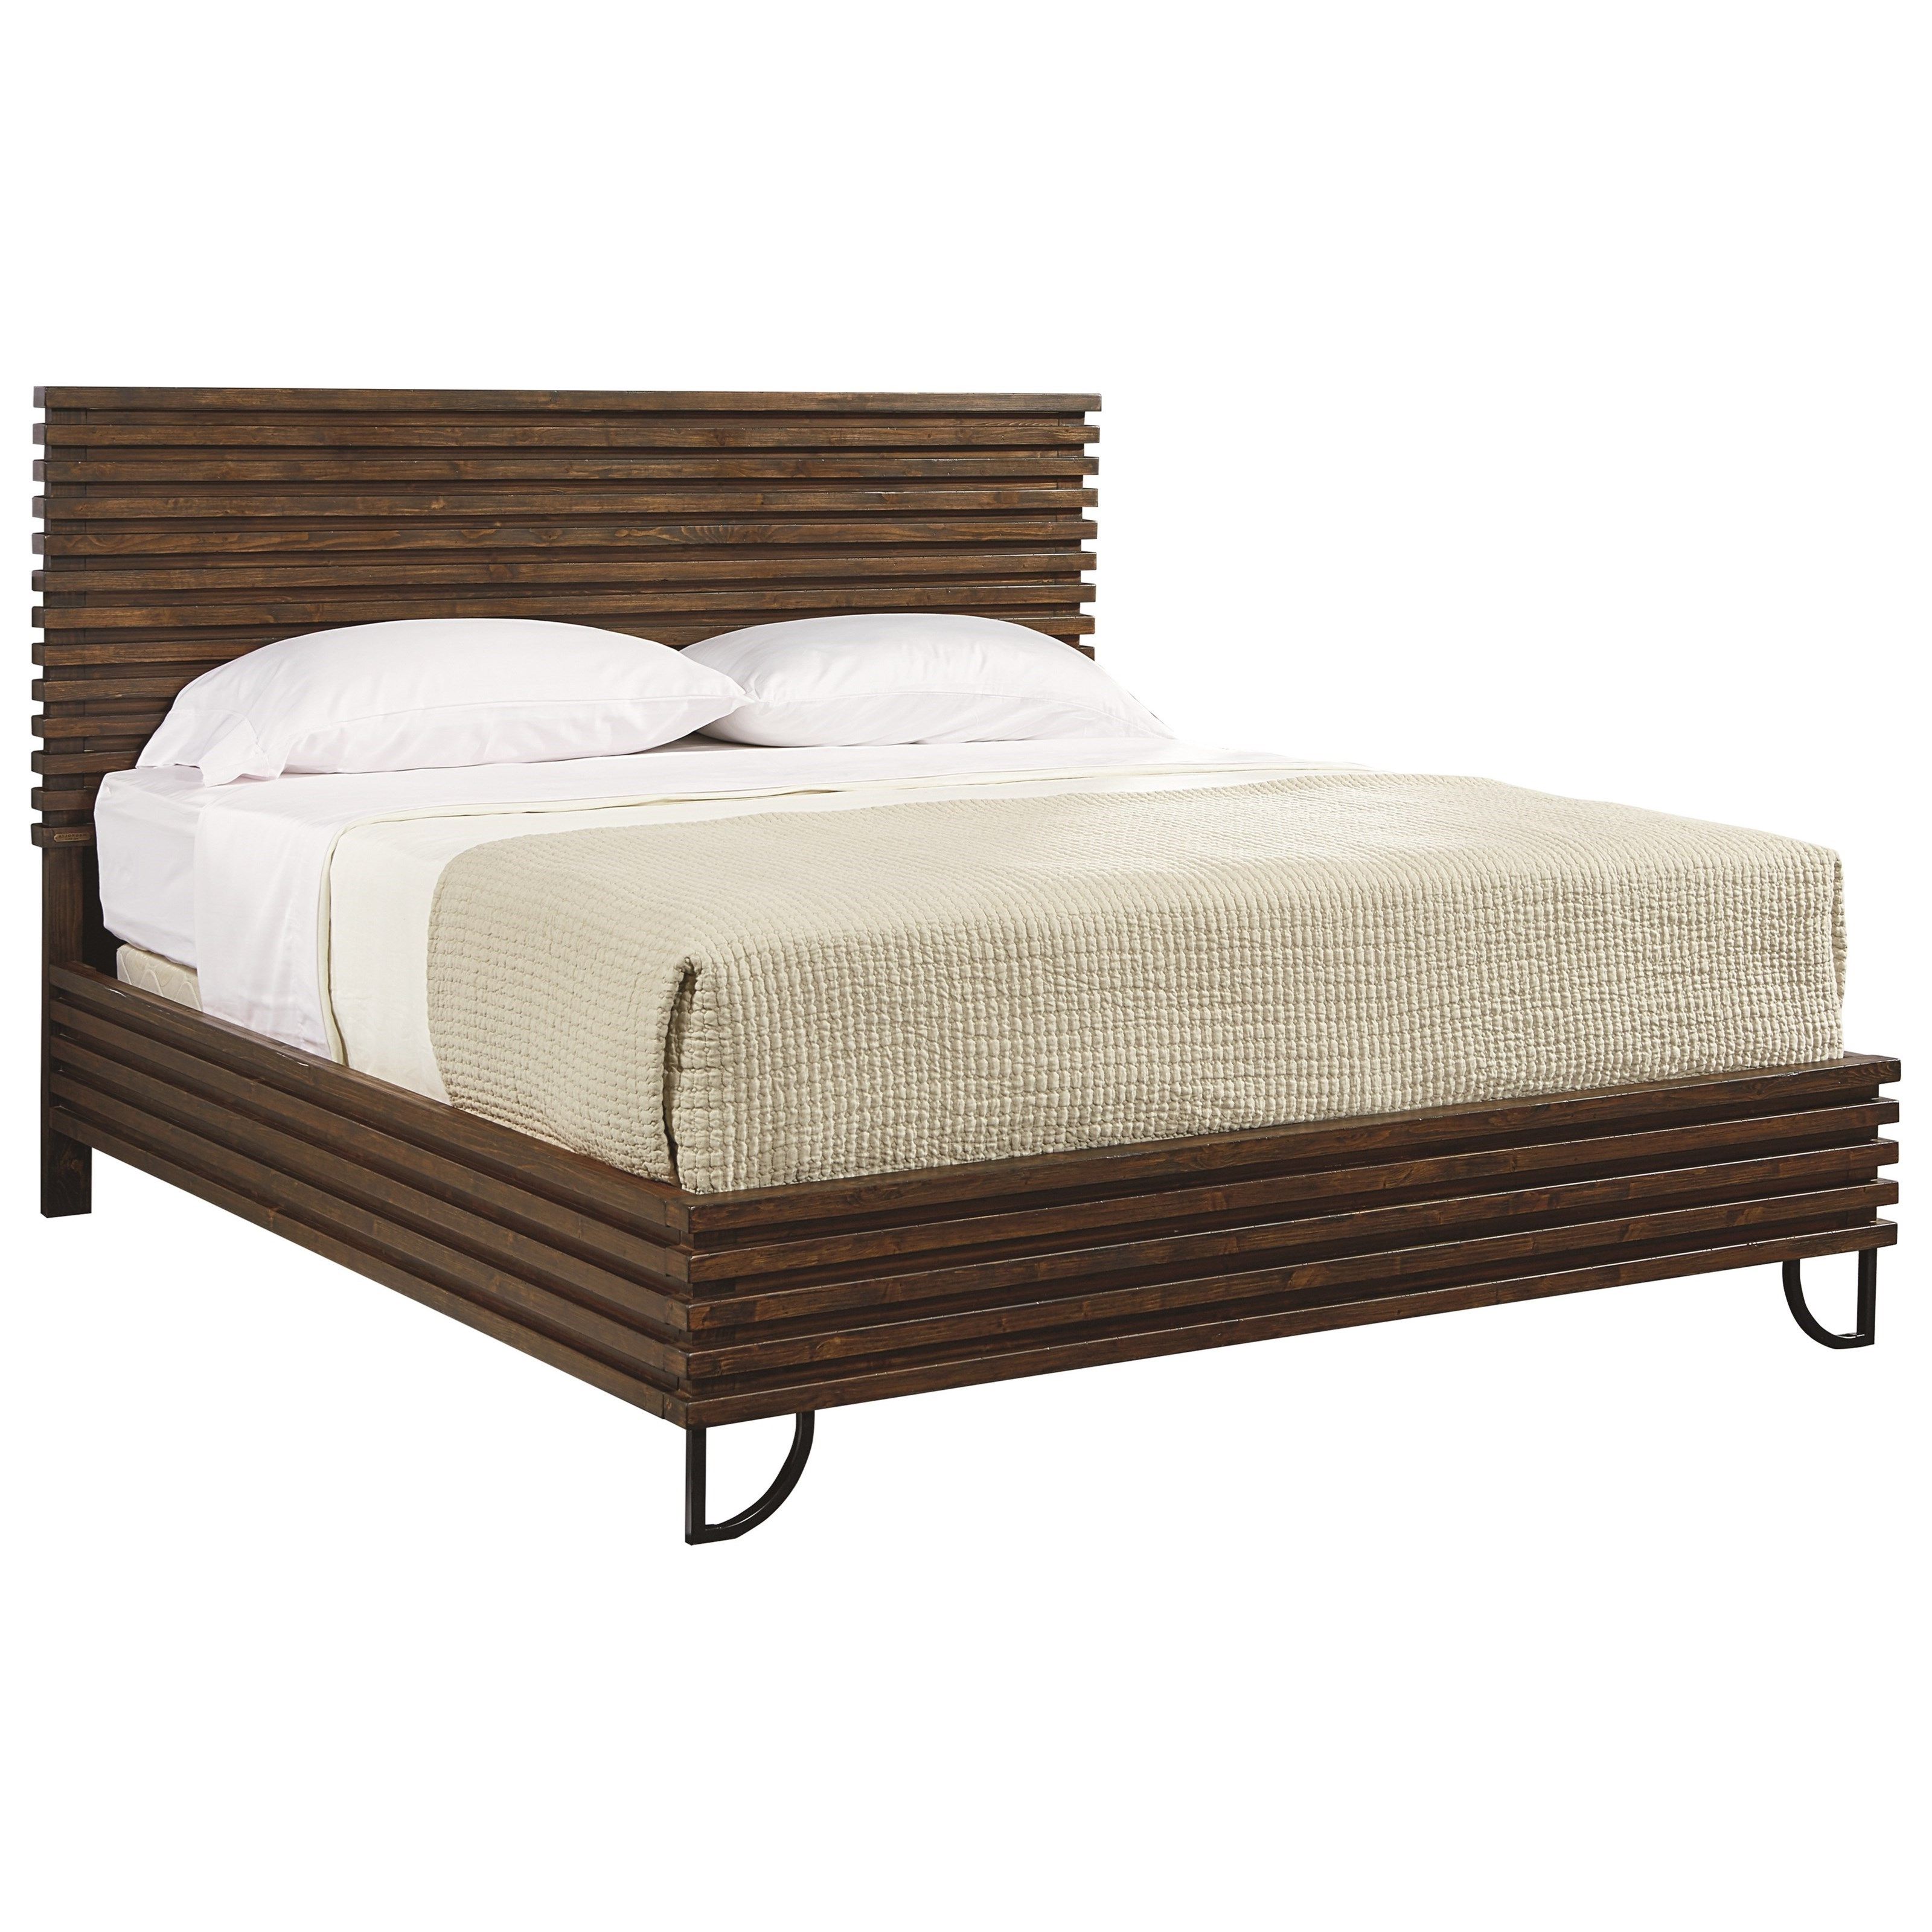 King Stacked Slat Bed With Retro Metal Legsmagnolia Home With Regard To Well Known Magnolia Home Entwine Rattan Arm Chairs (Photo 18 of 20)